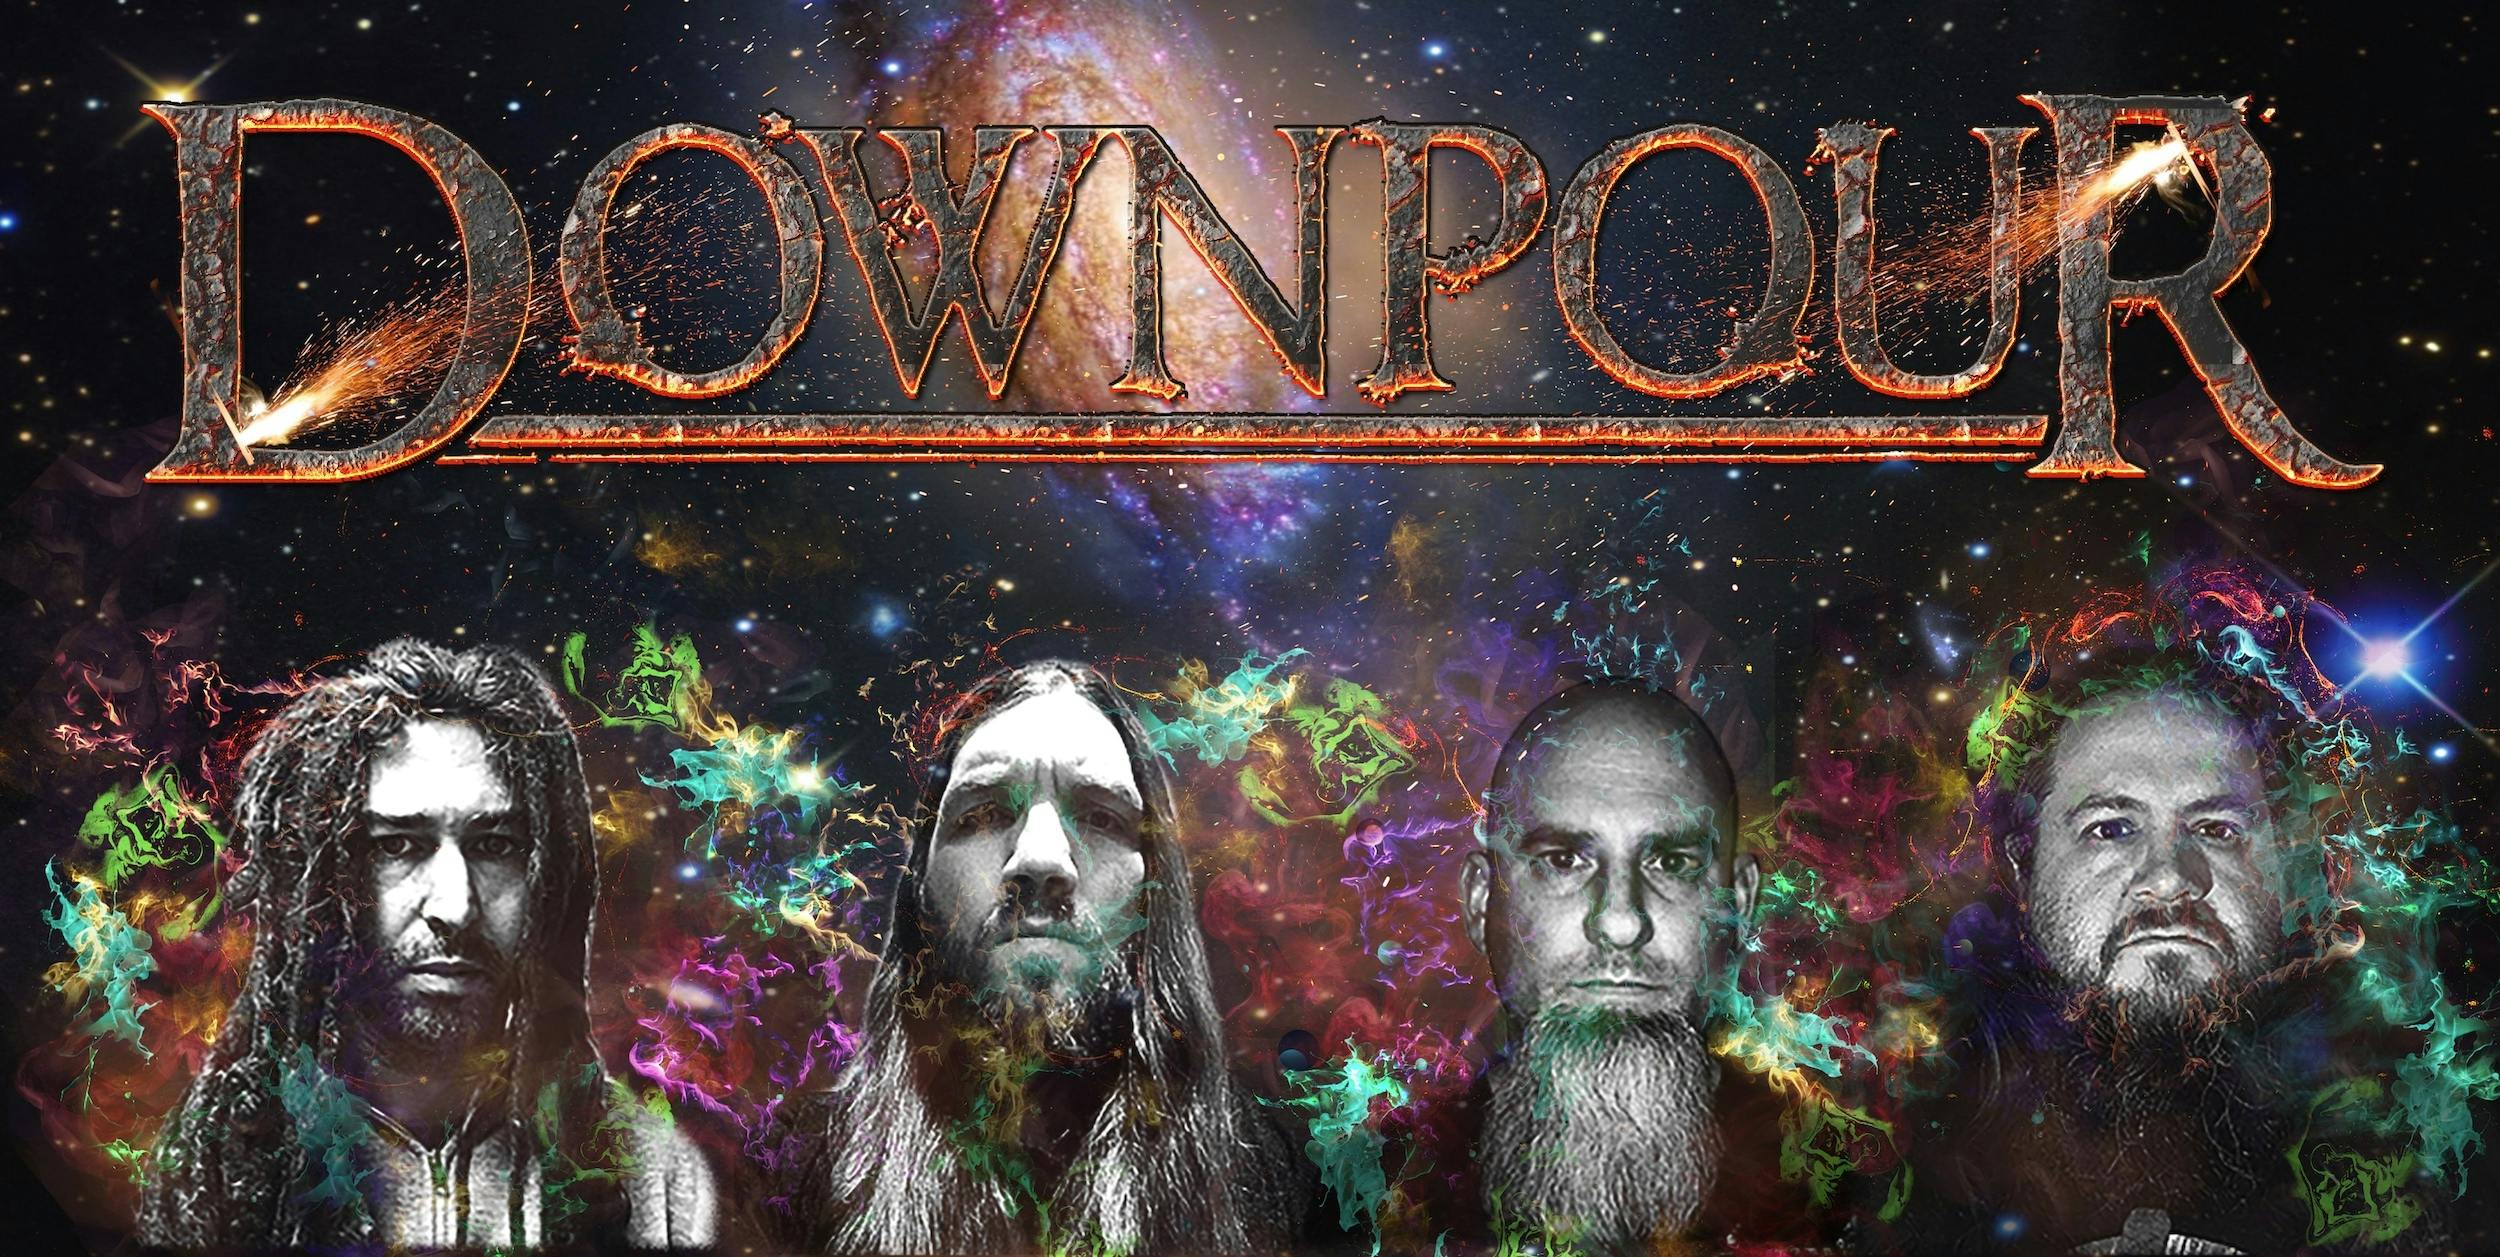 Exclusive: Downpour (Ex-Shadows Fall and Ex-Unearth) Premiere Debut Self-Titled Album